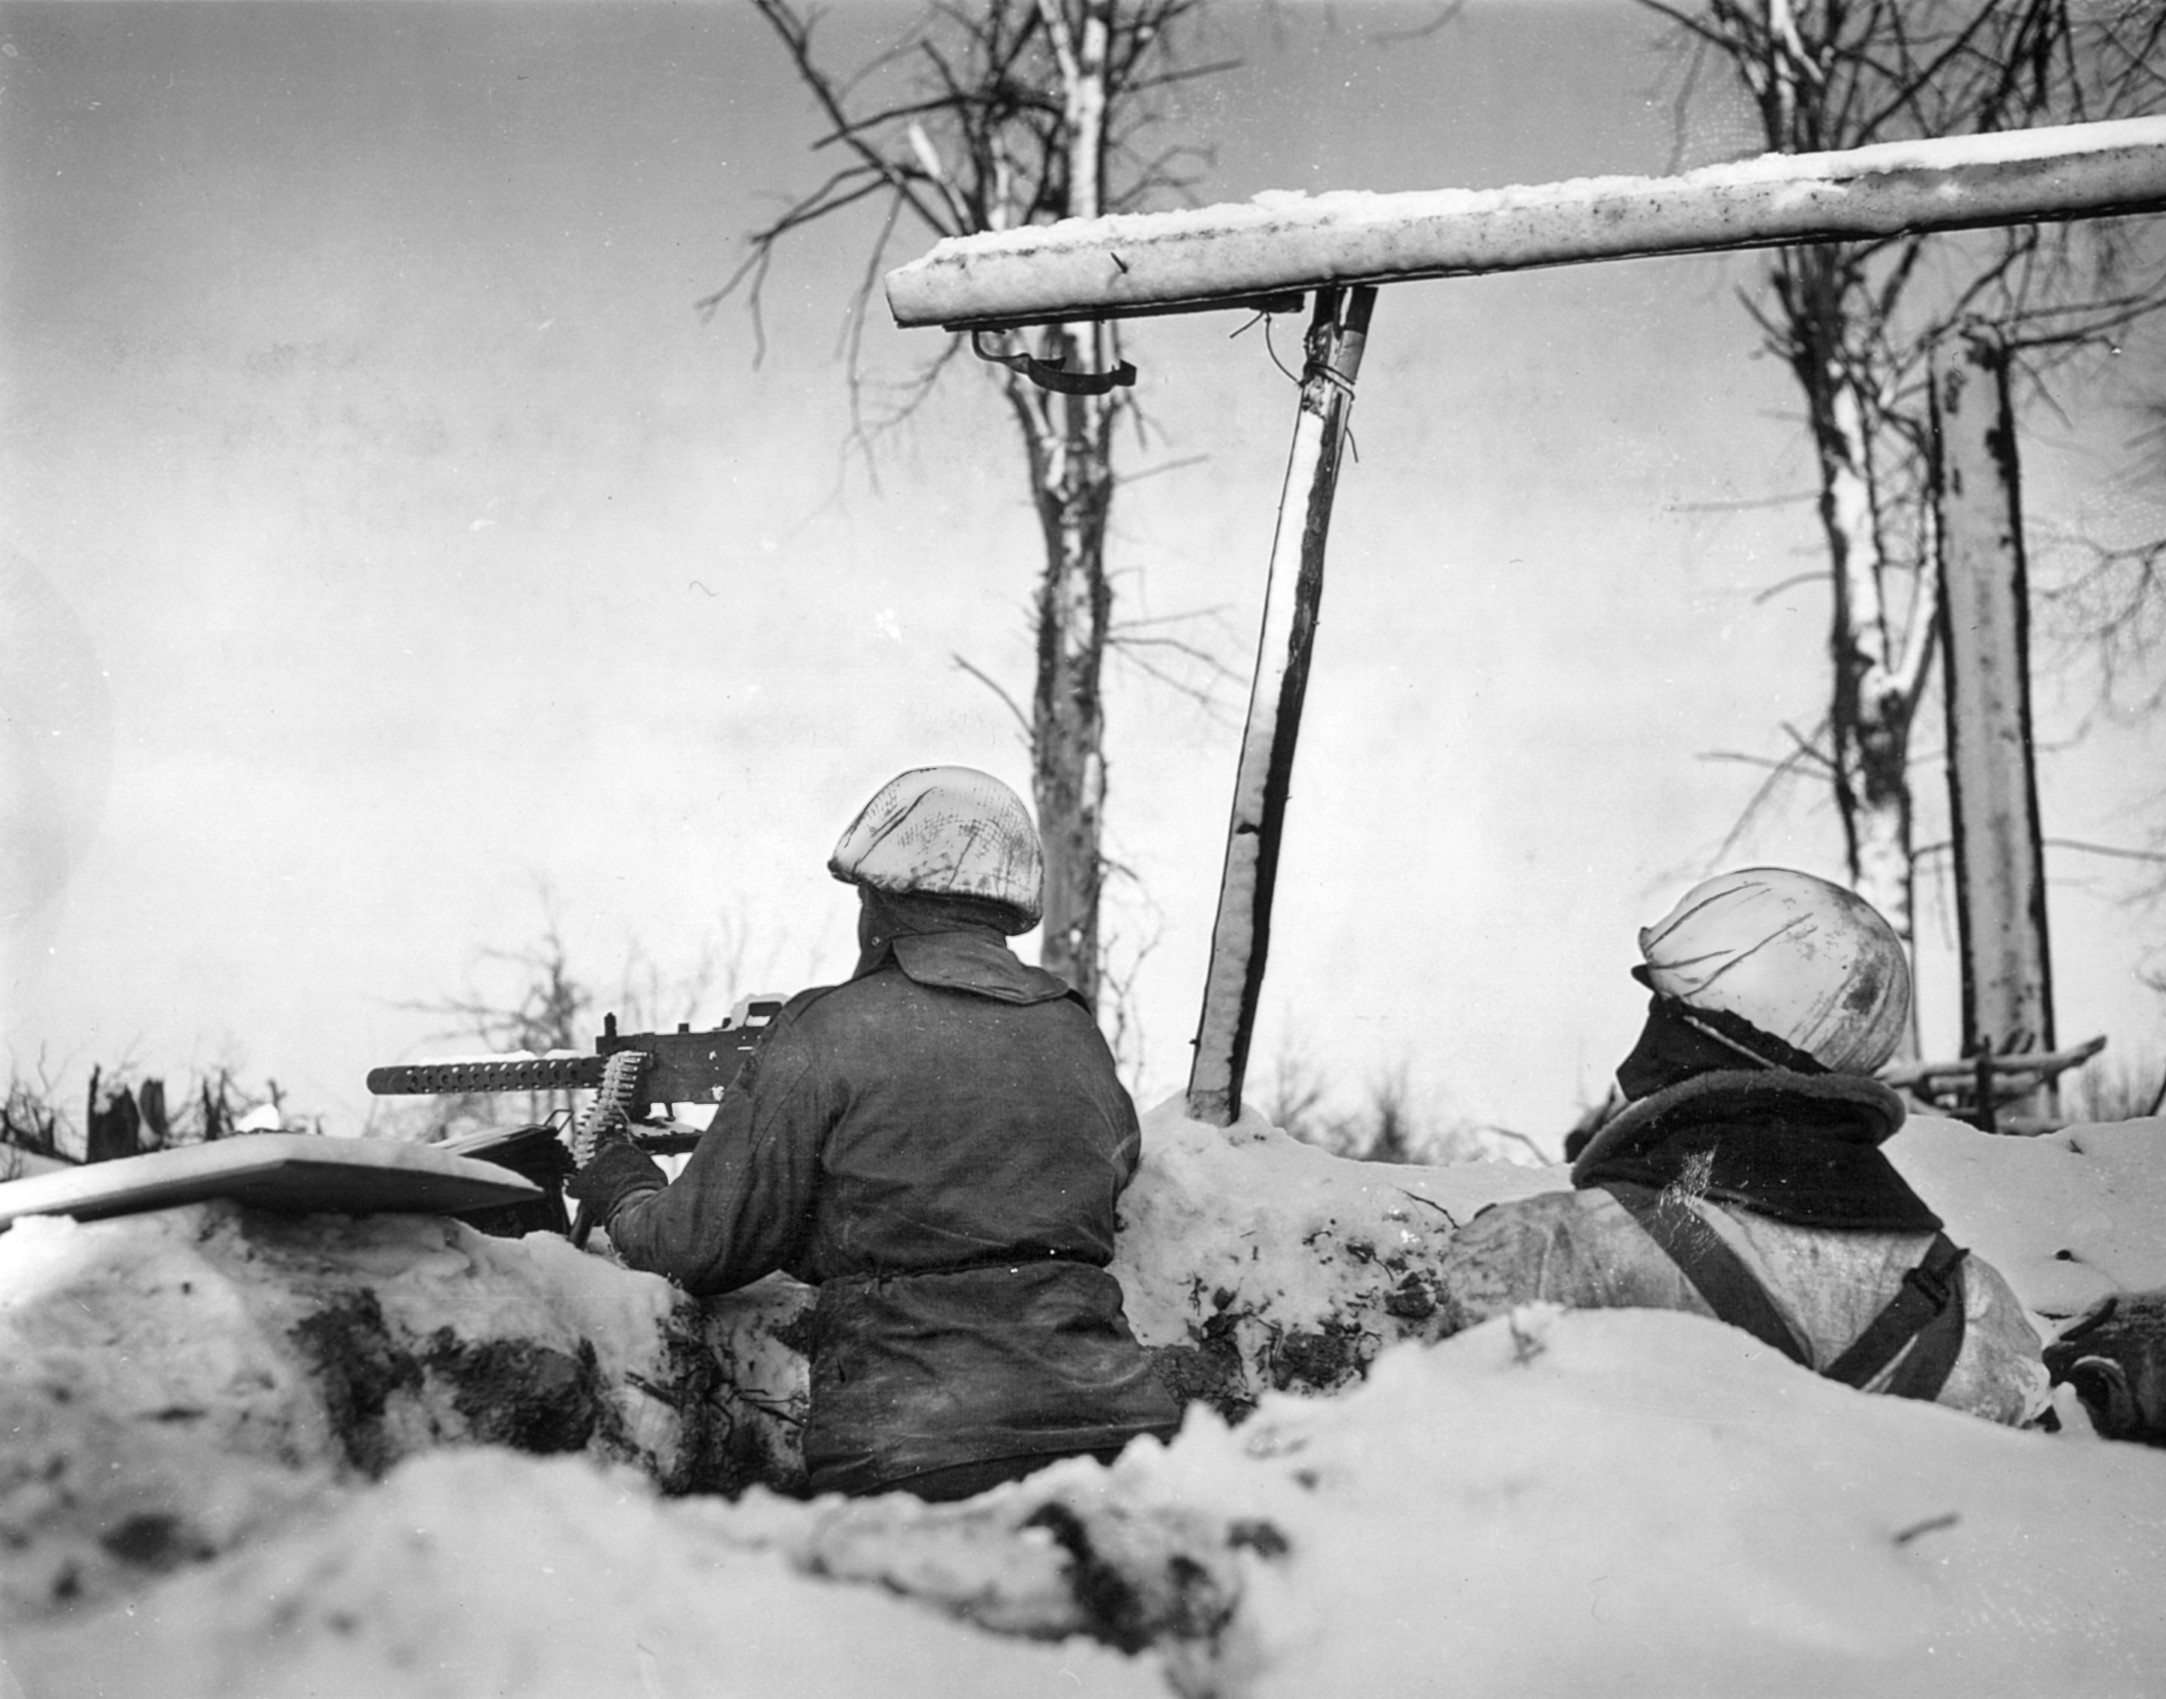 Camouflaged to blend into the winter landscape, two soldiers of the 7th Armored Division defend a roadblock near St. Vith.